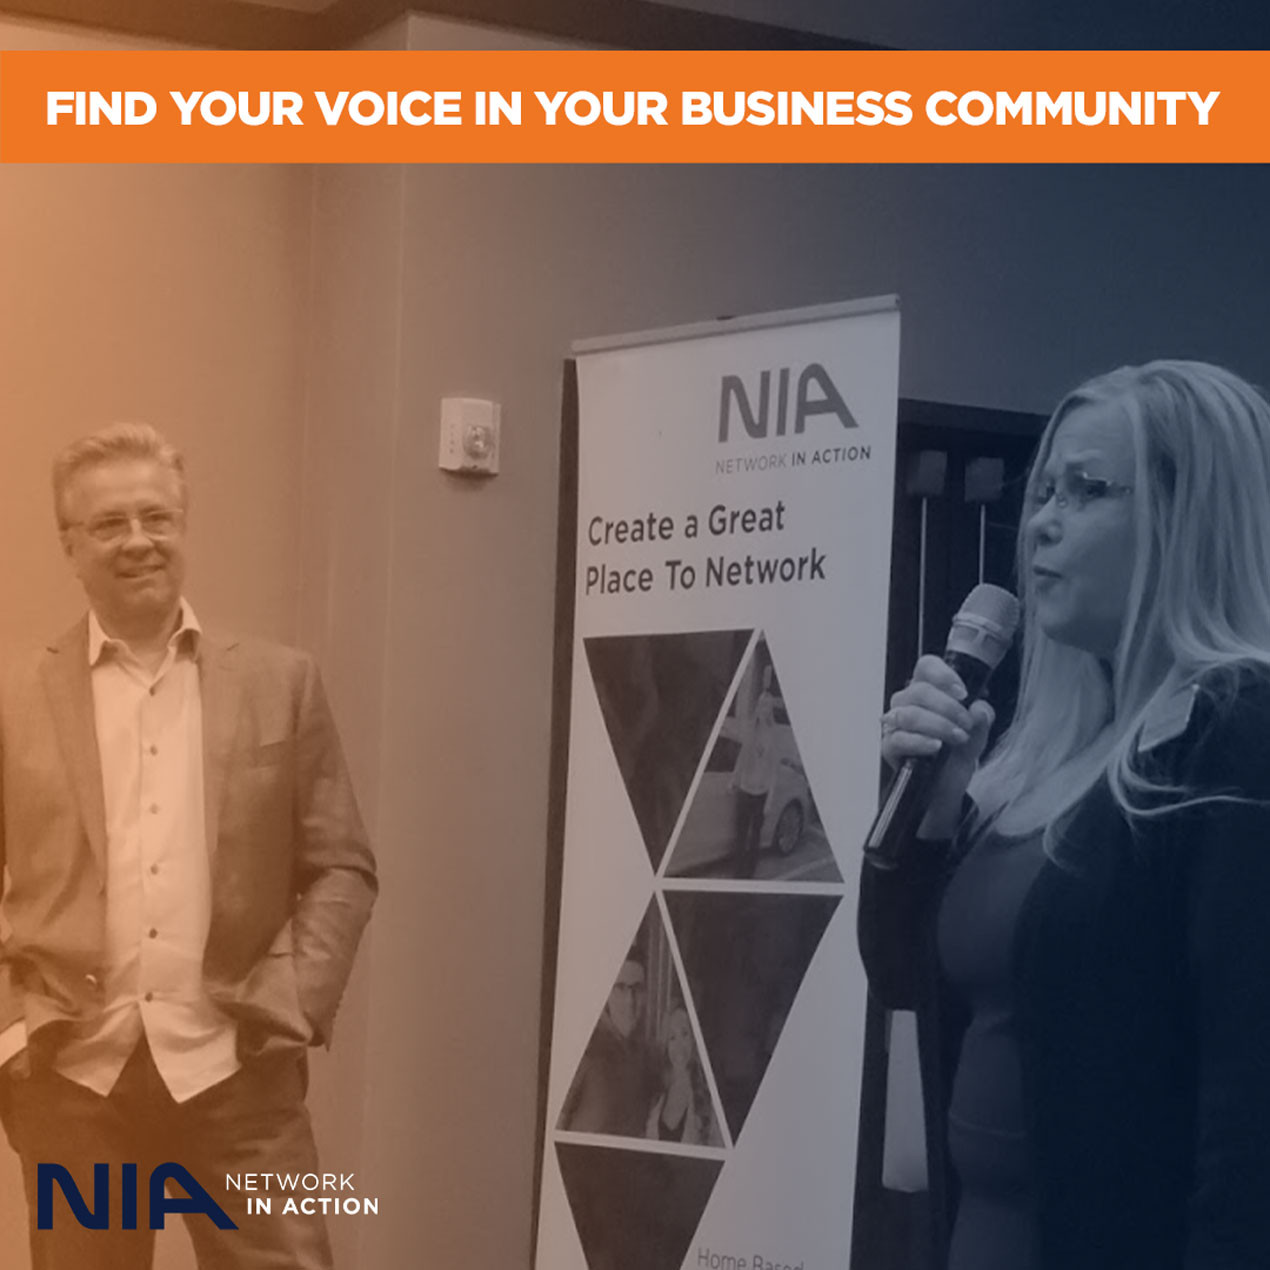 Finding your voice in your business community